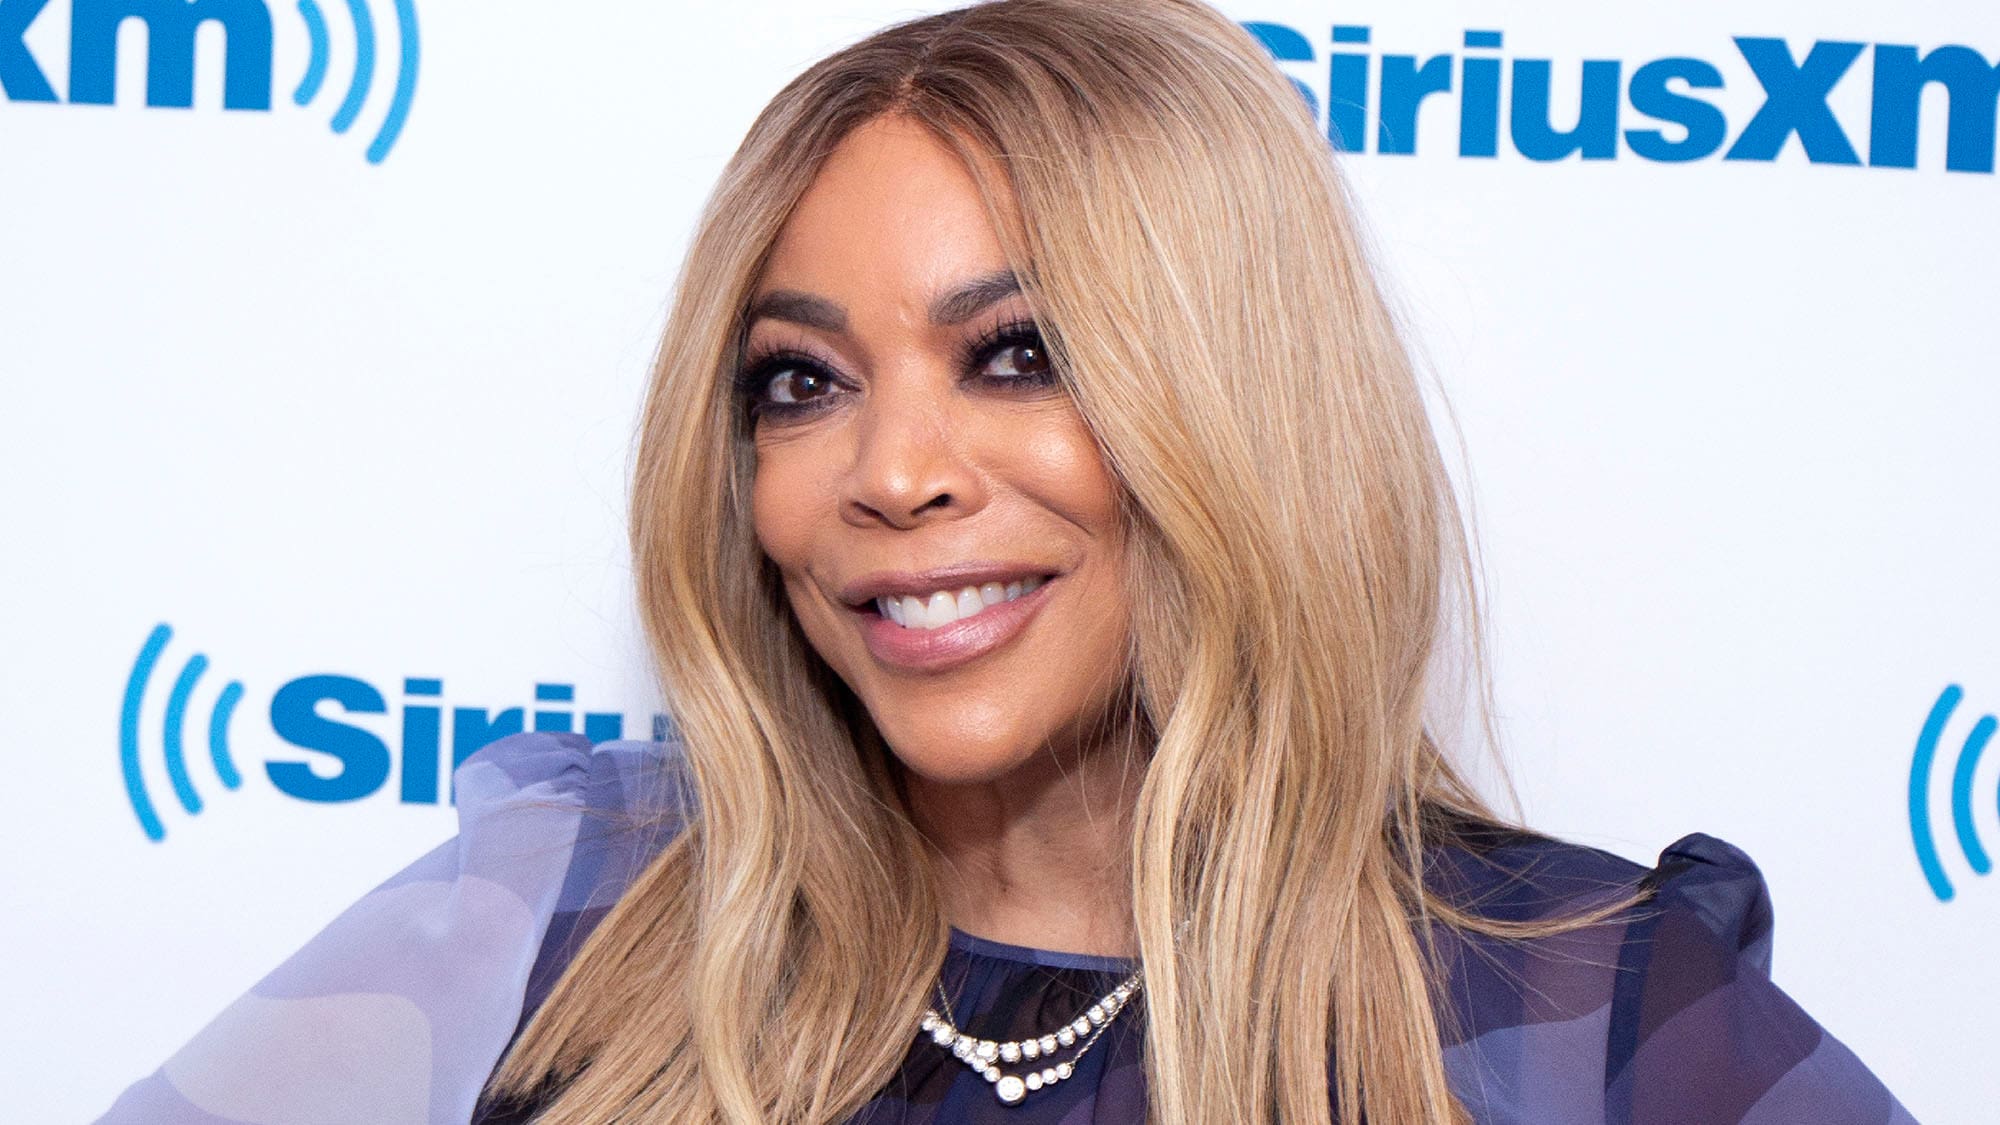 Wendy Williams' Recent Behind The Scenes Photo Shoot Have Fans Exclaiming: 'She's Taking It To Another Level!'